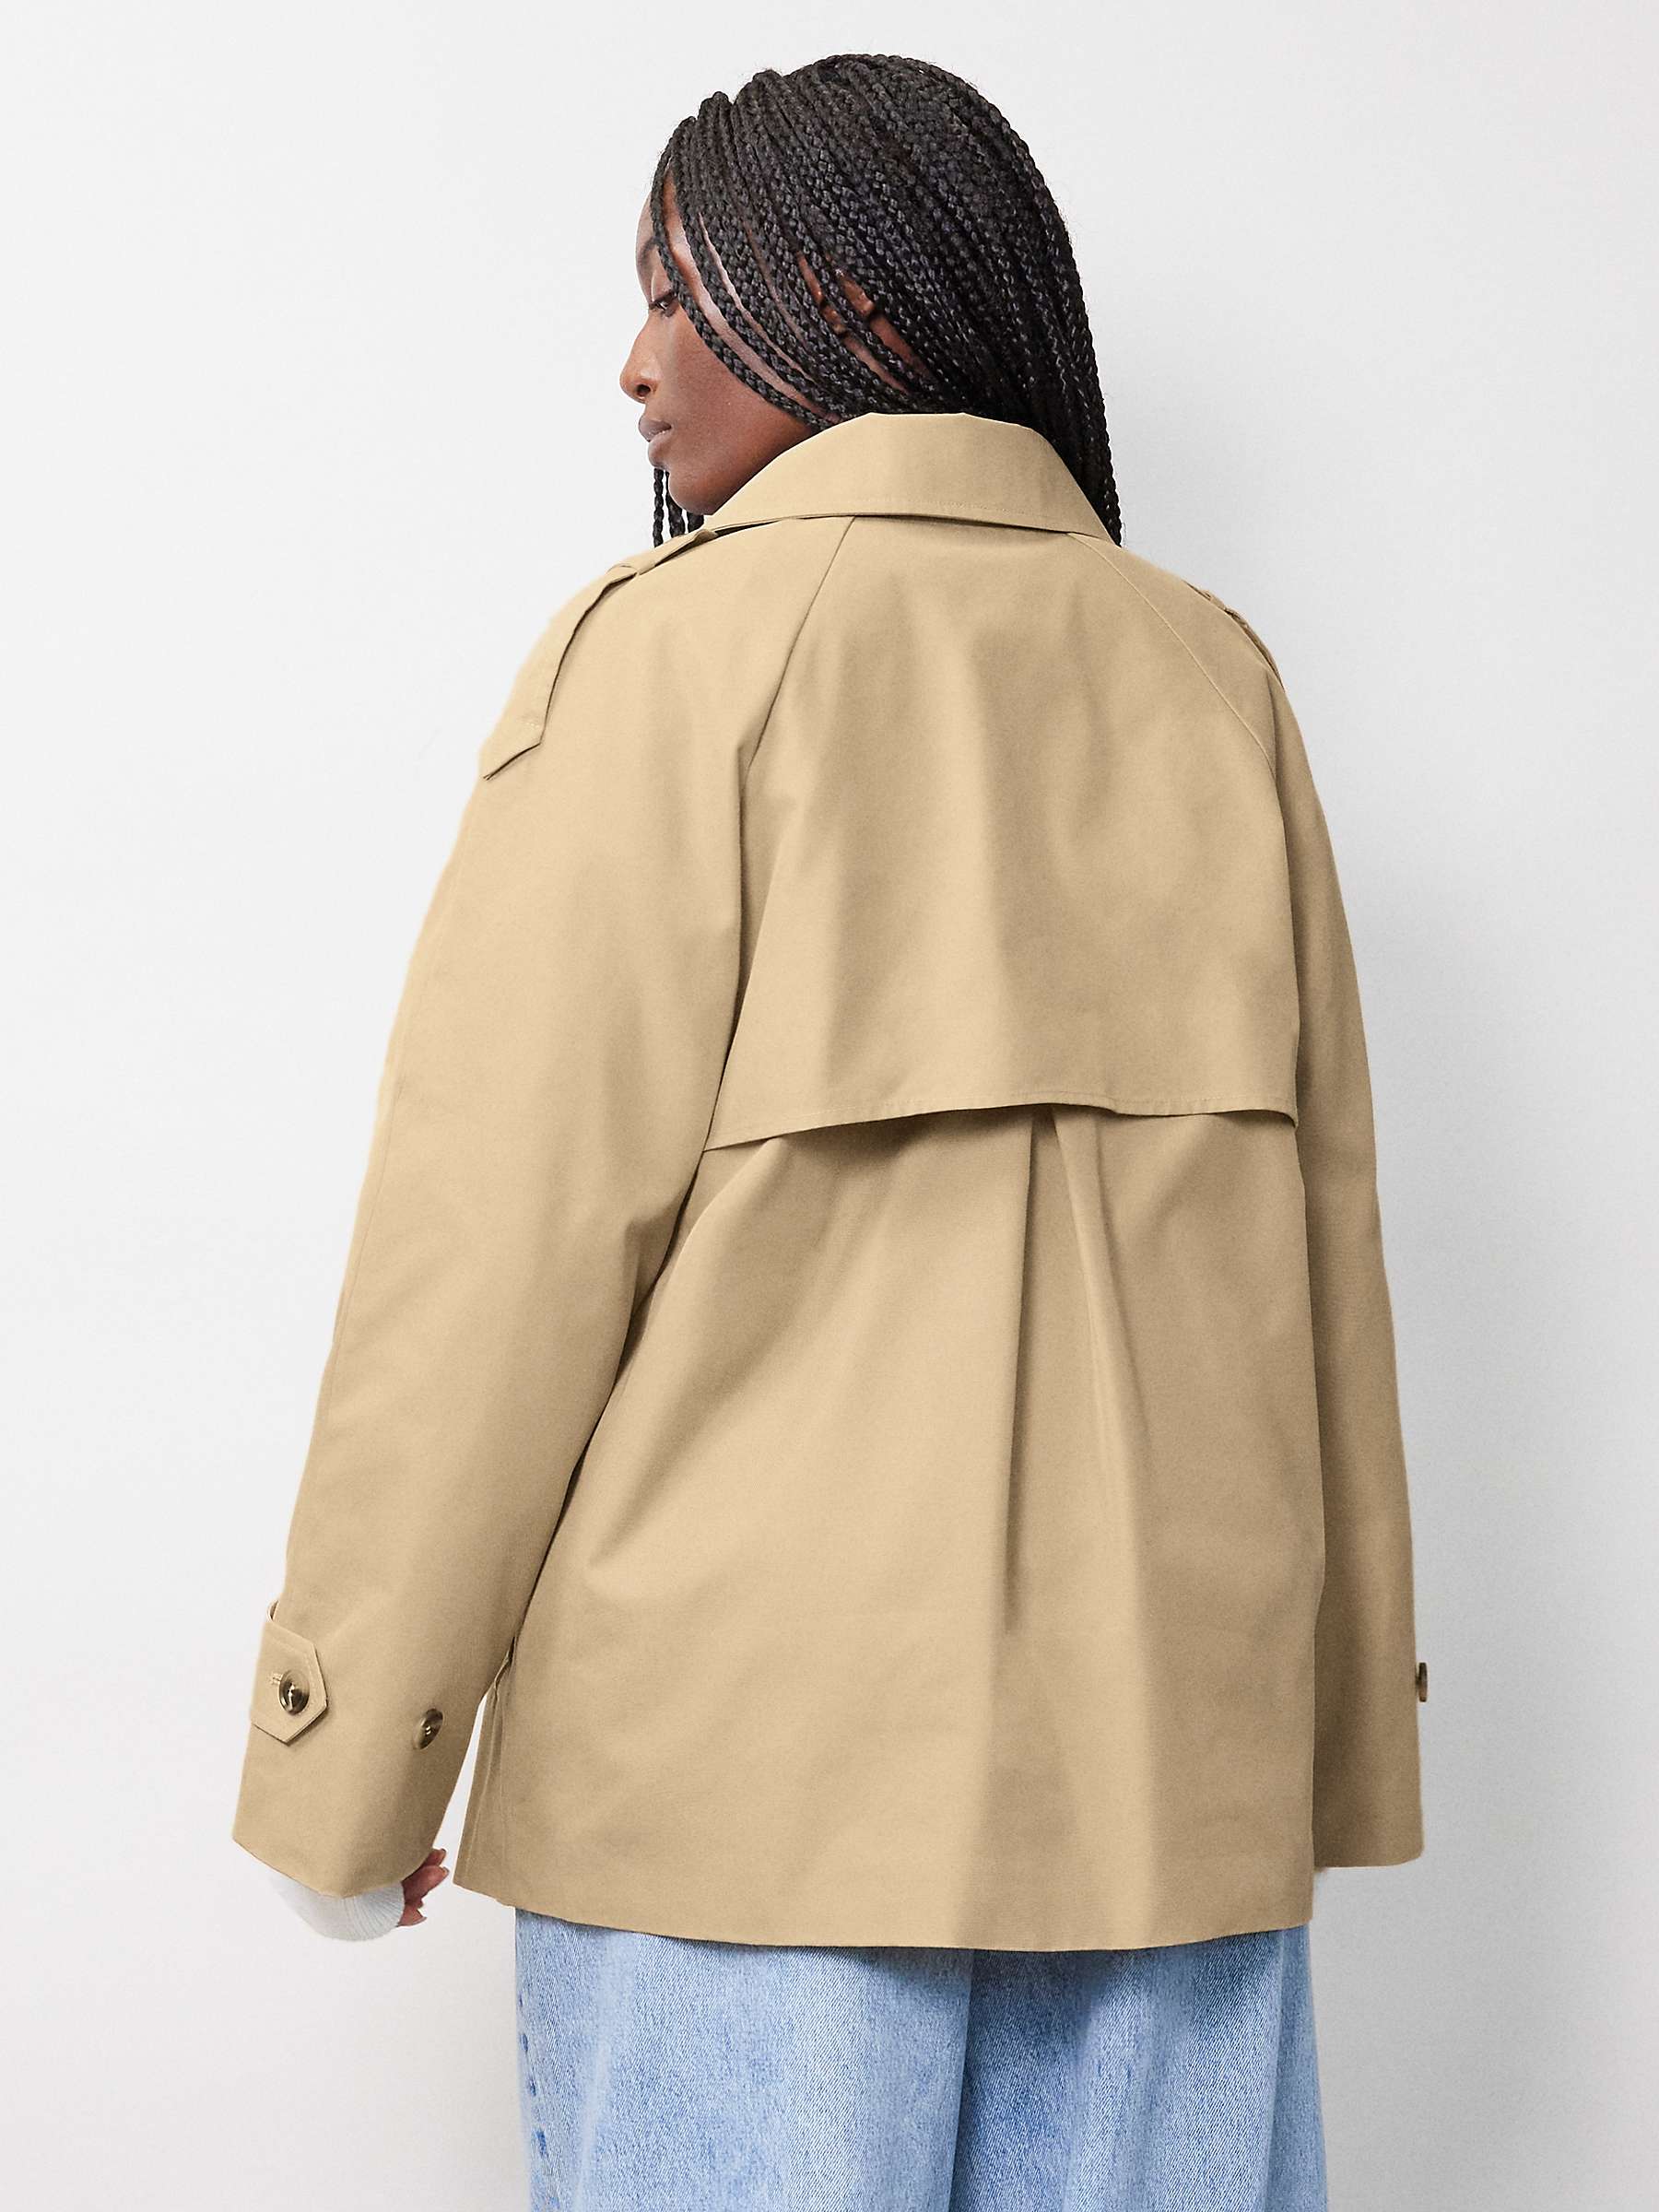 Buy Albaray Organic Cotton Blend Short Trench Coat, Stone Online at johnlewis.com